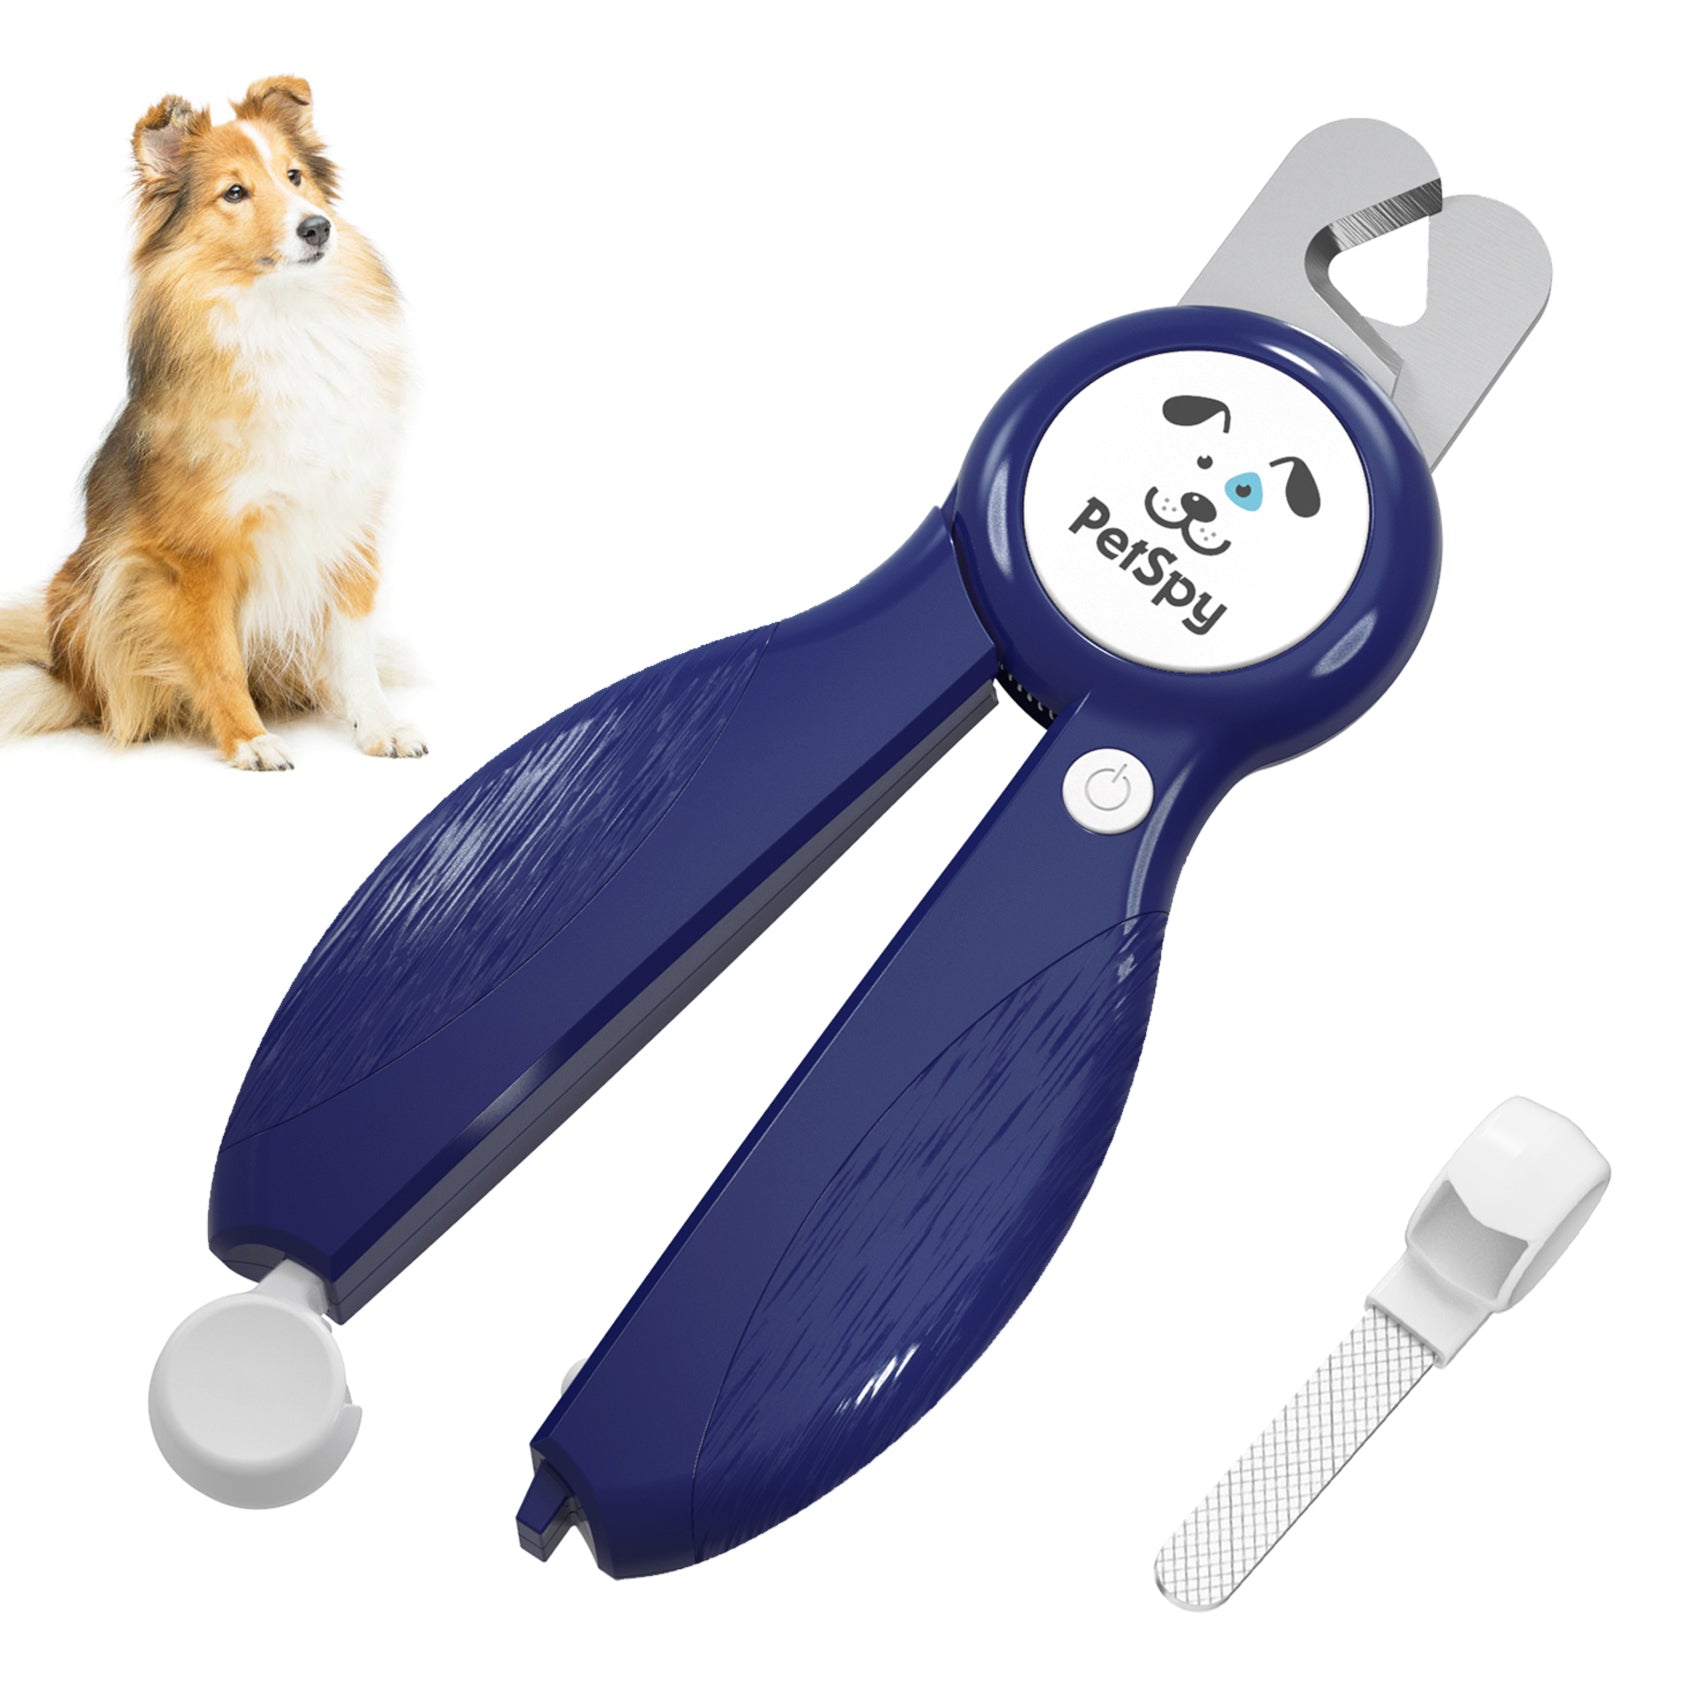 Electric Pet Nail Grinder by Hertzko - for Gentle and Painless Paws  Grooming, Trimming, Shaping, and Smoothing for Dogs, Cats, Rabbits and  Birds - Portable & Rechargeable, Includes USB Wire : Amazon.in: